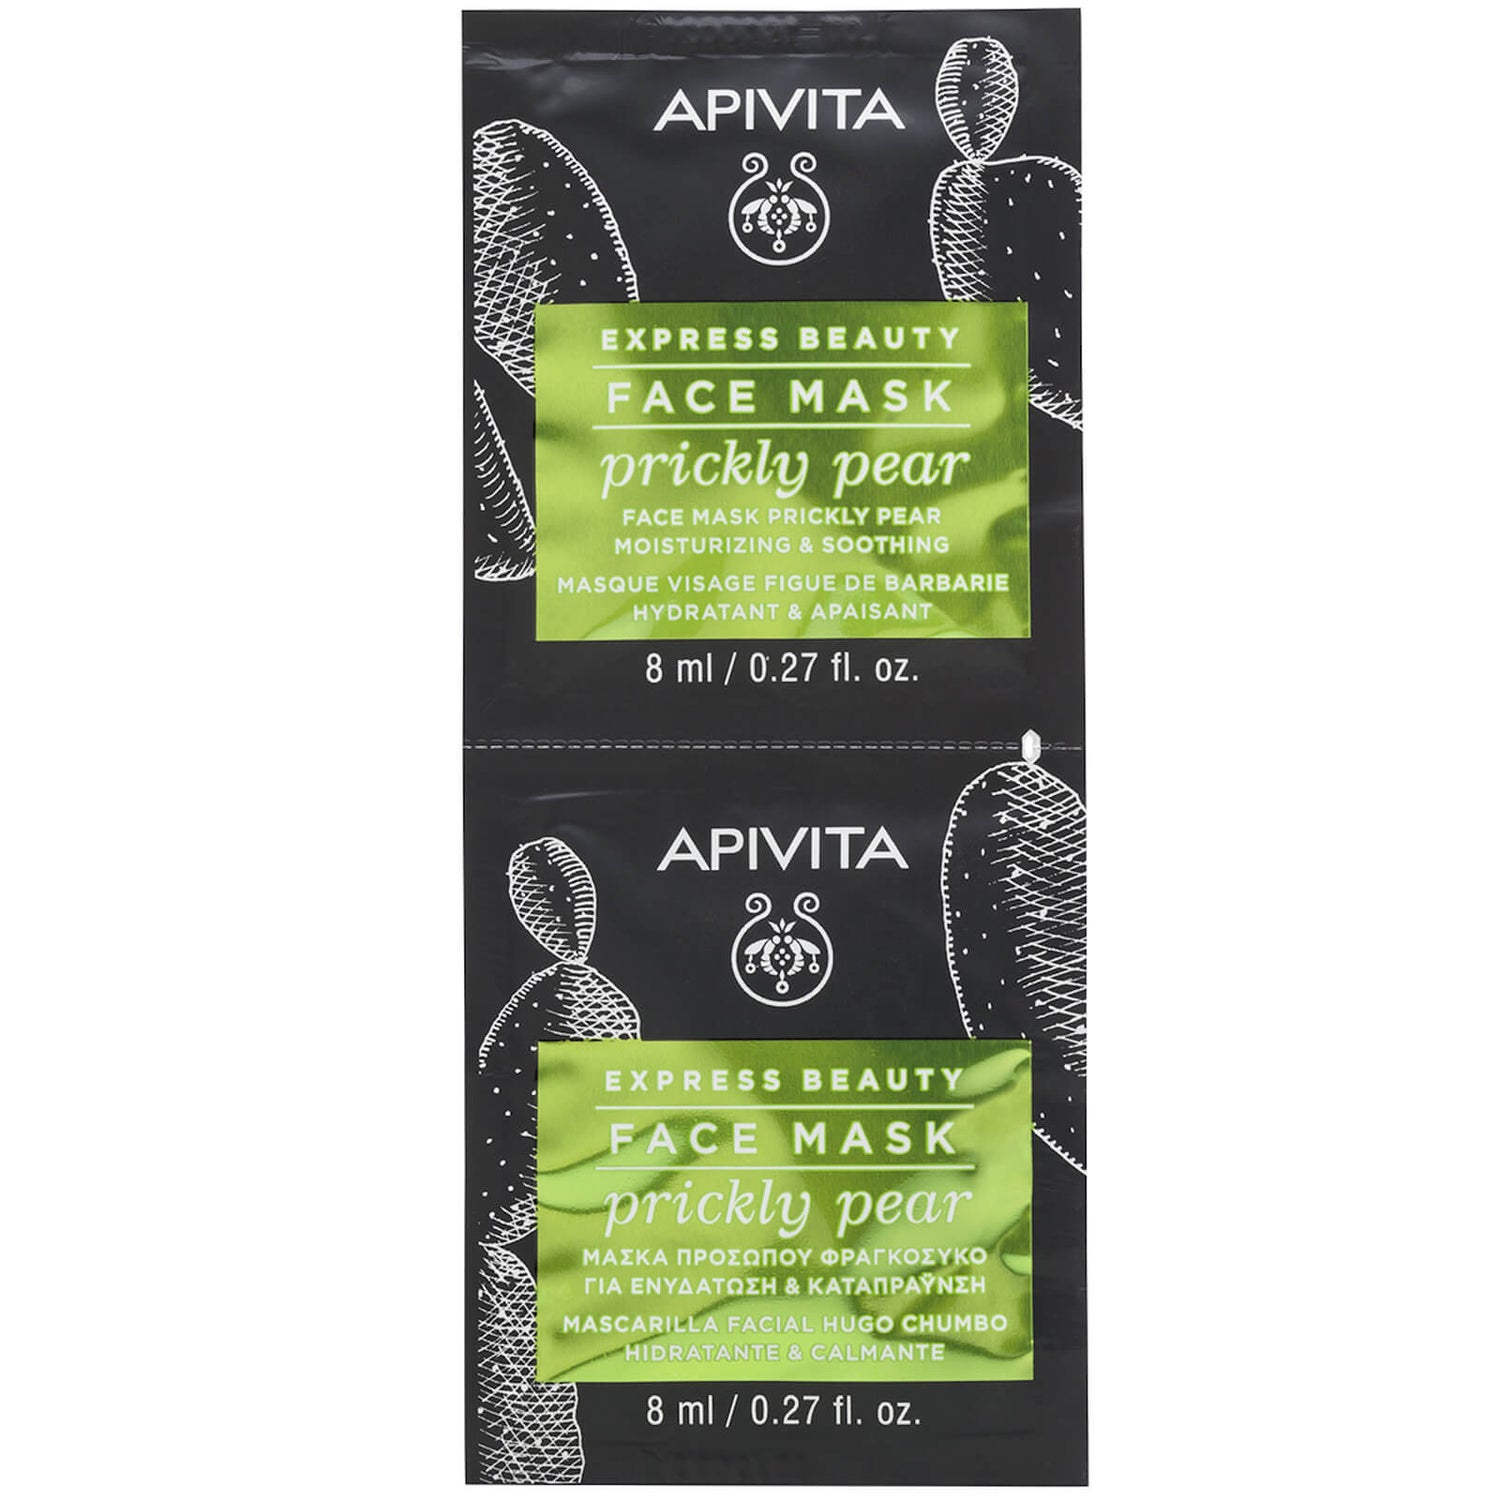 APIVITA Express Moisturizing & Soothing Face Mask - Prickly Pear 2 x 8 ml